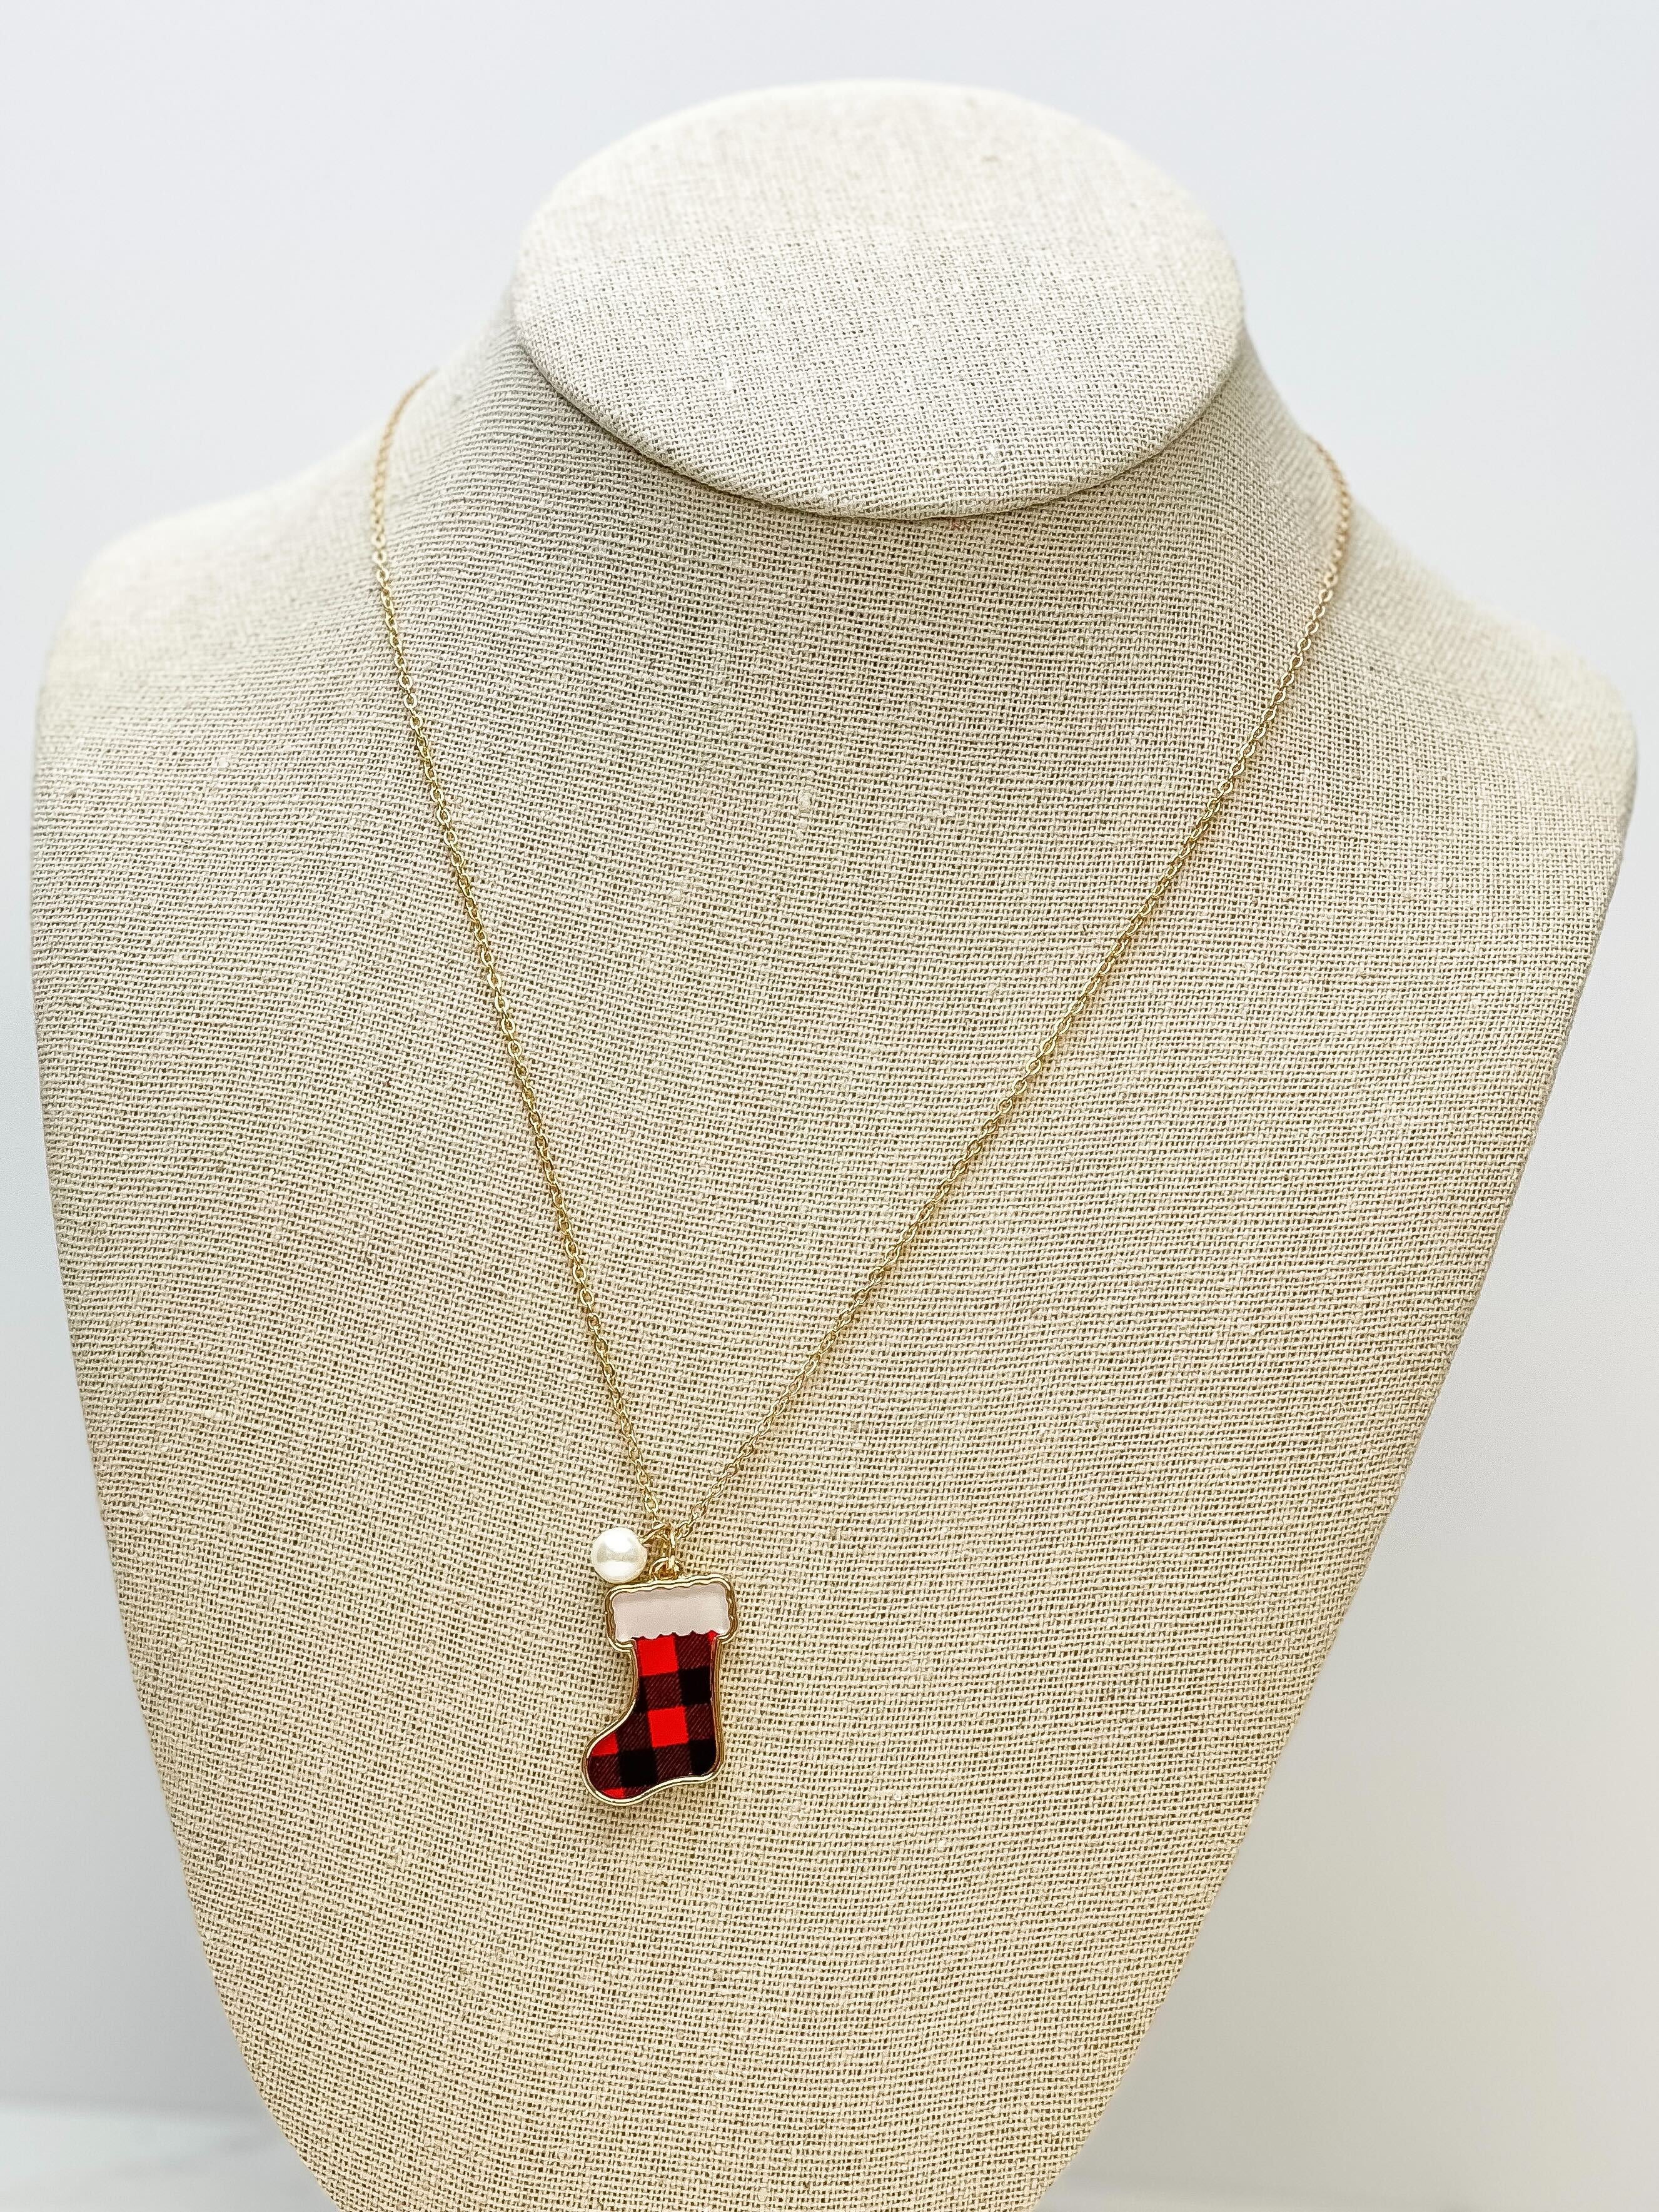 Printed Stocking Pendant Necklace - Red Buffalo Check